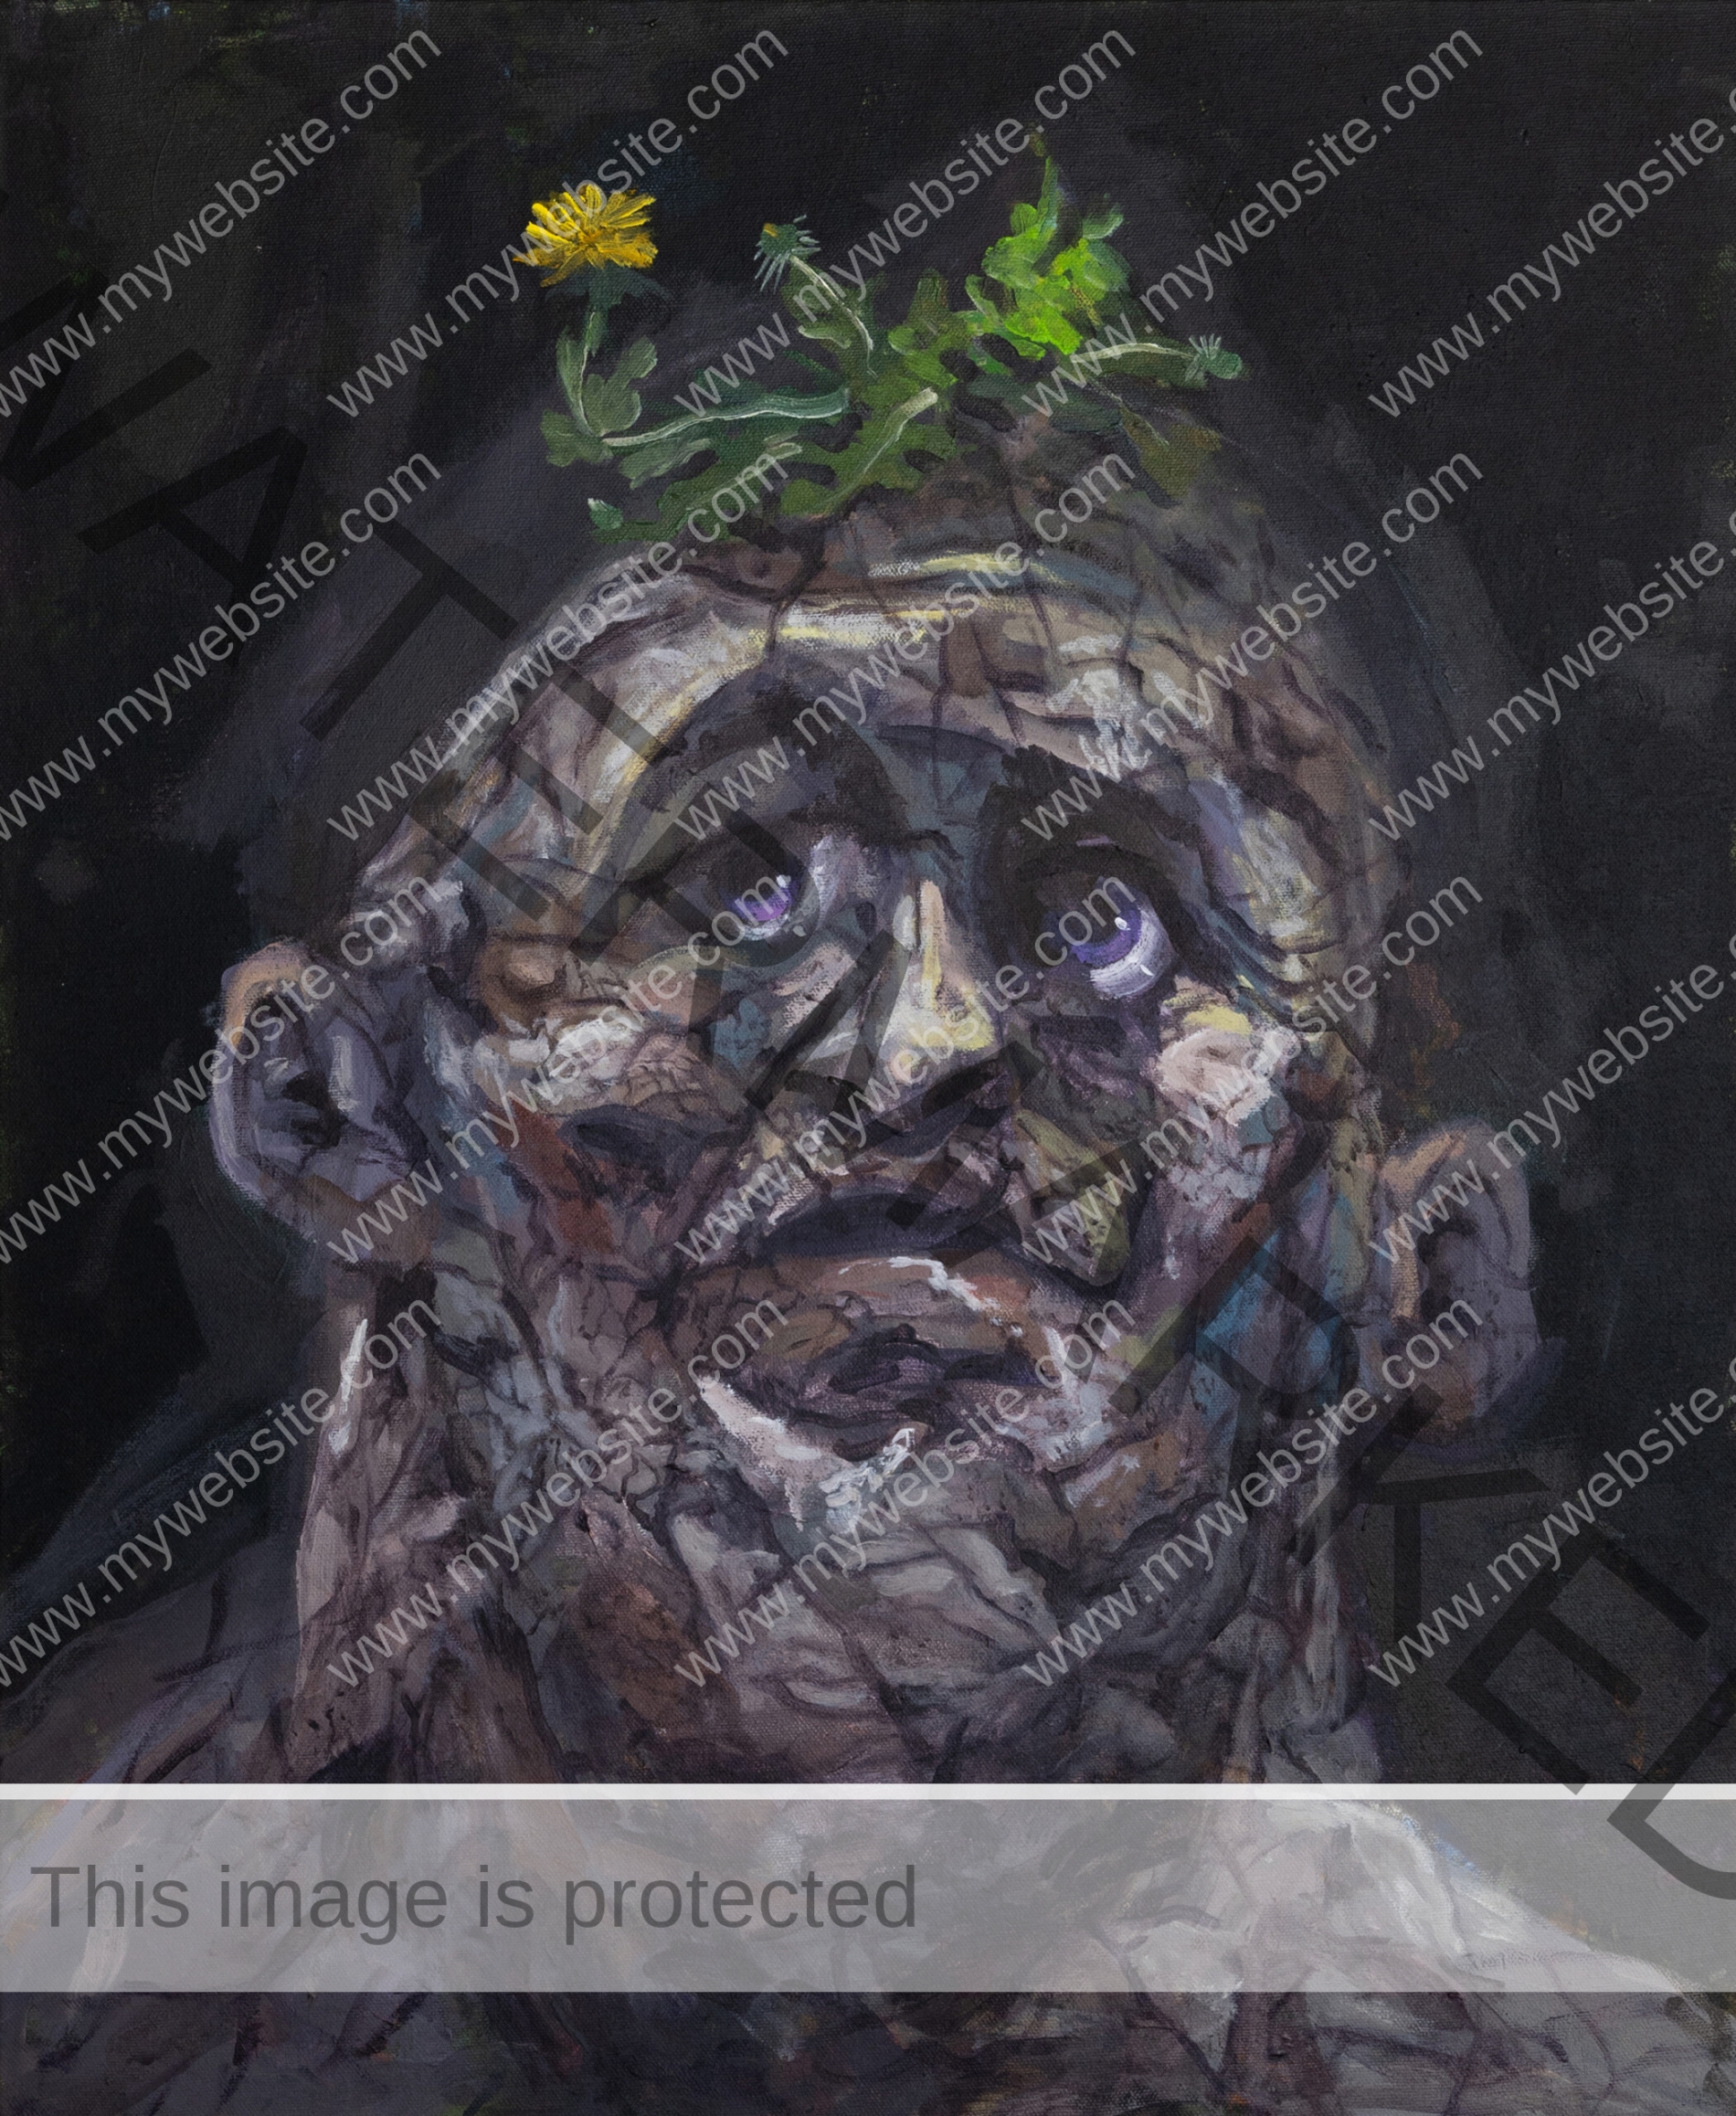 Man of stone observes a flower grow in his head